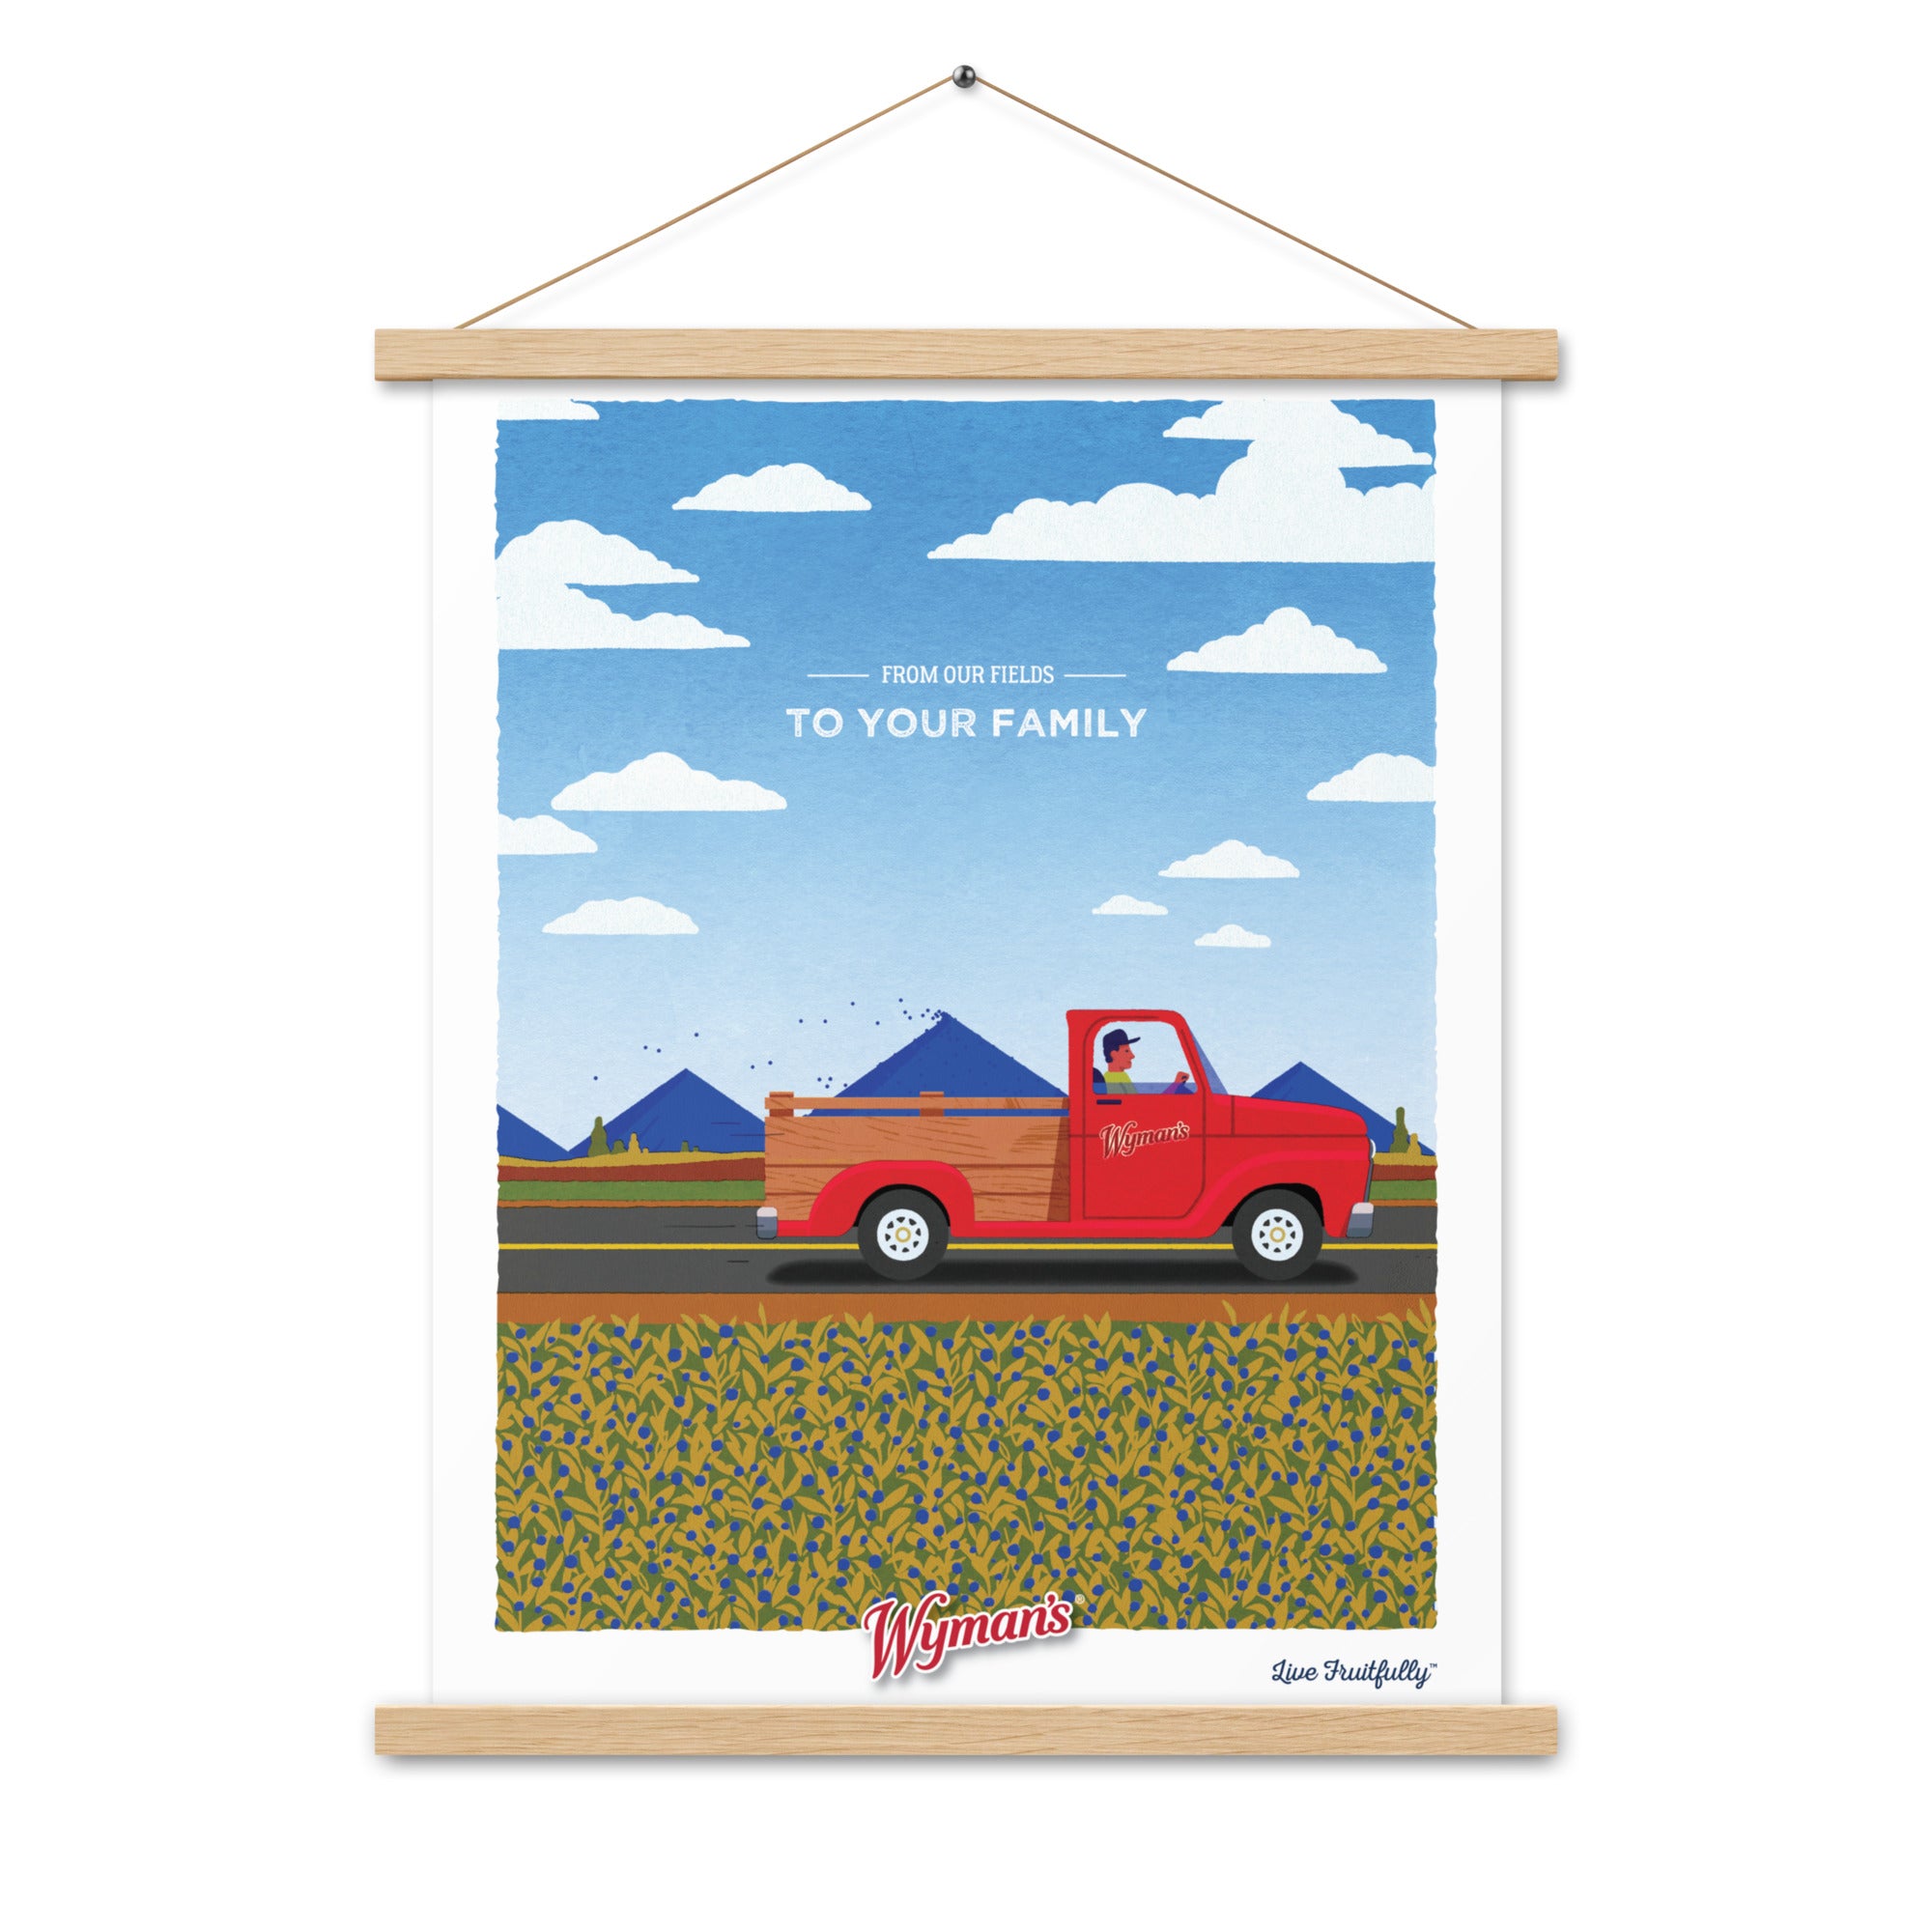 A From Our Fields to Your Family Poster with a design featuring an image of a red truck on the road by Shop Wyman's.